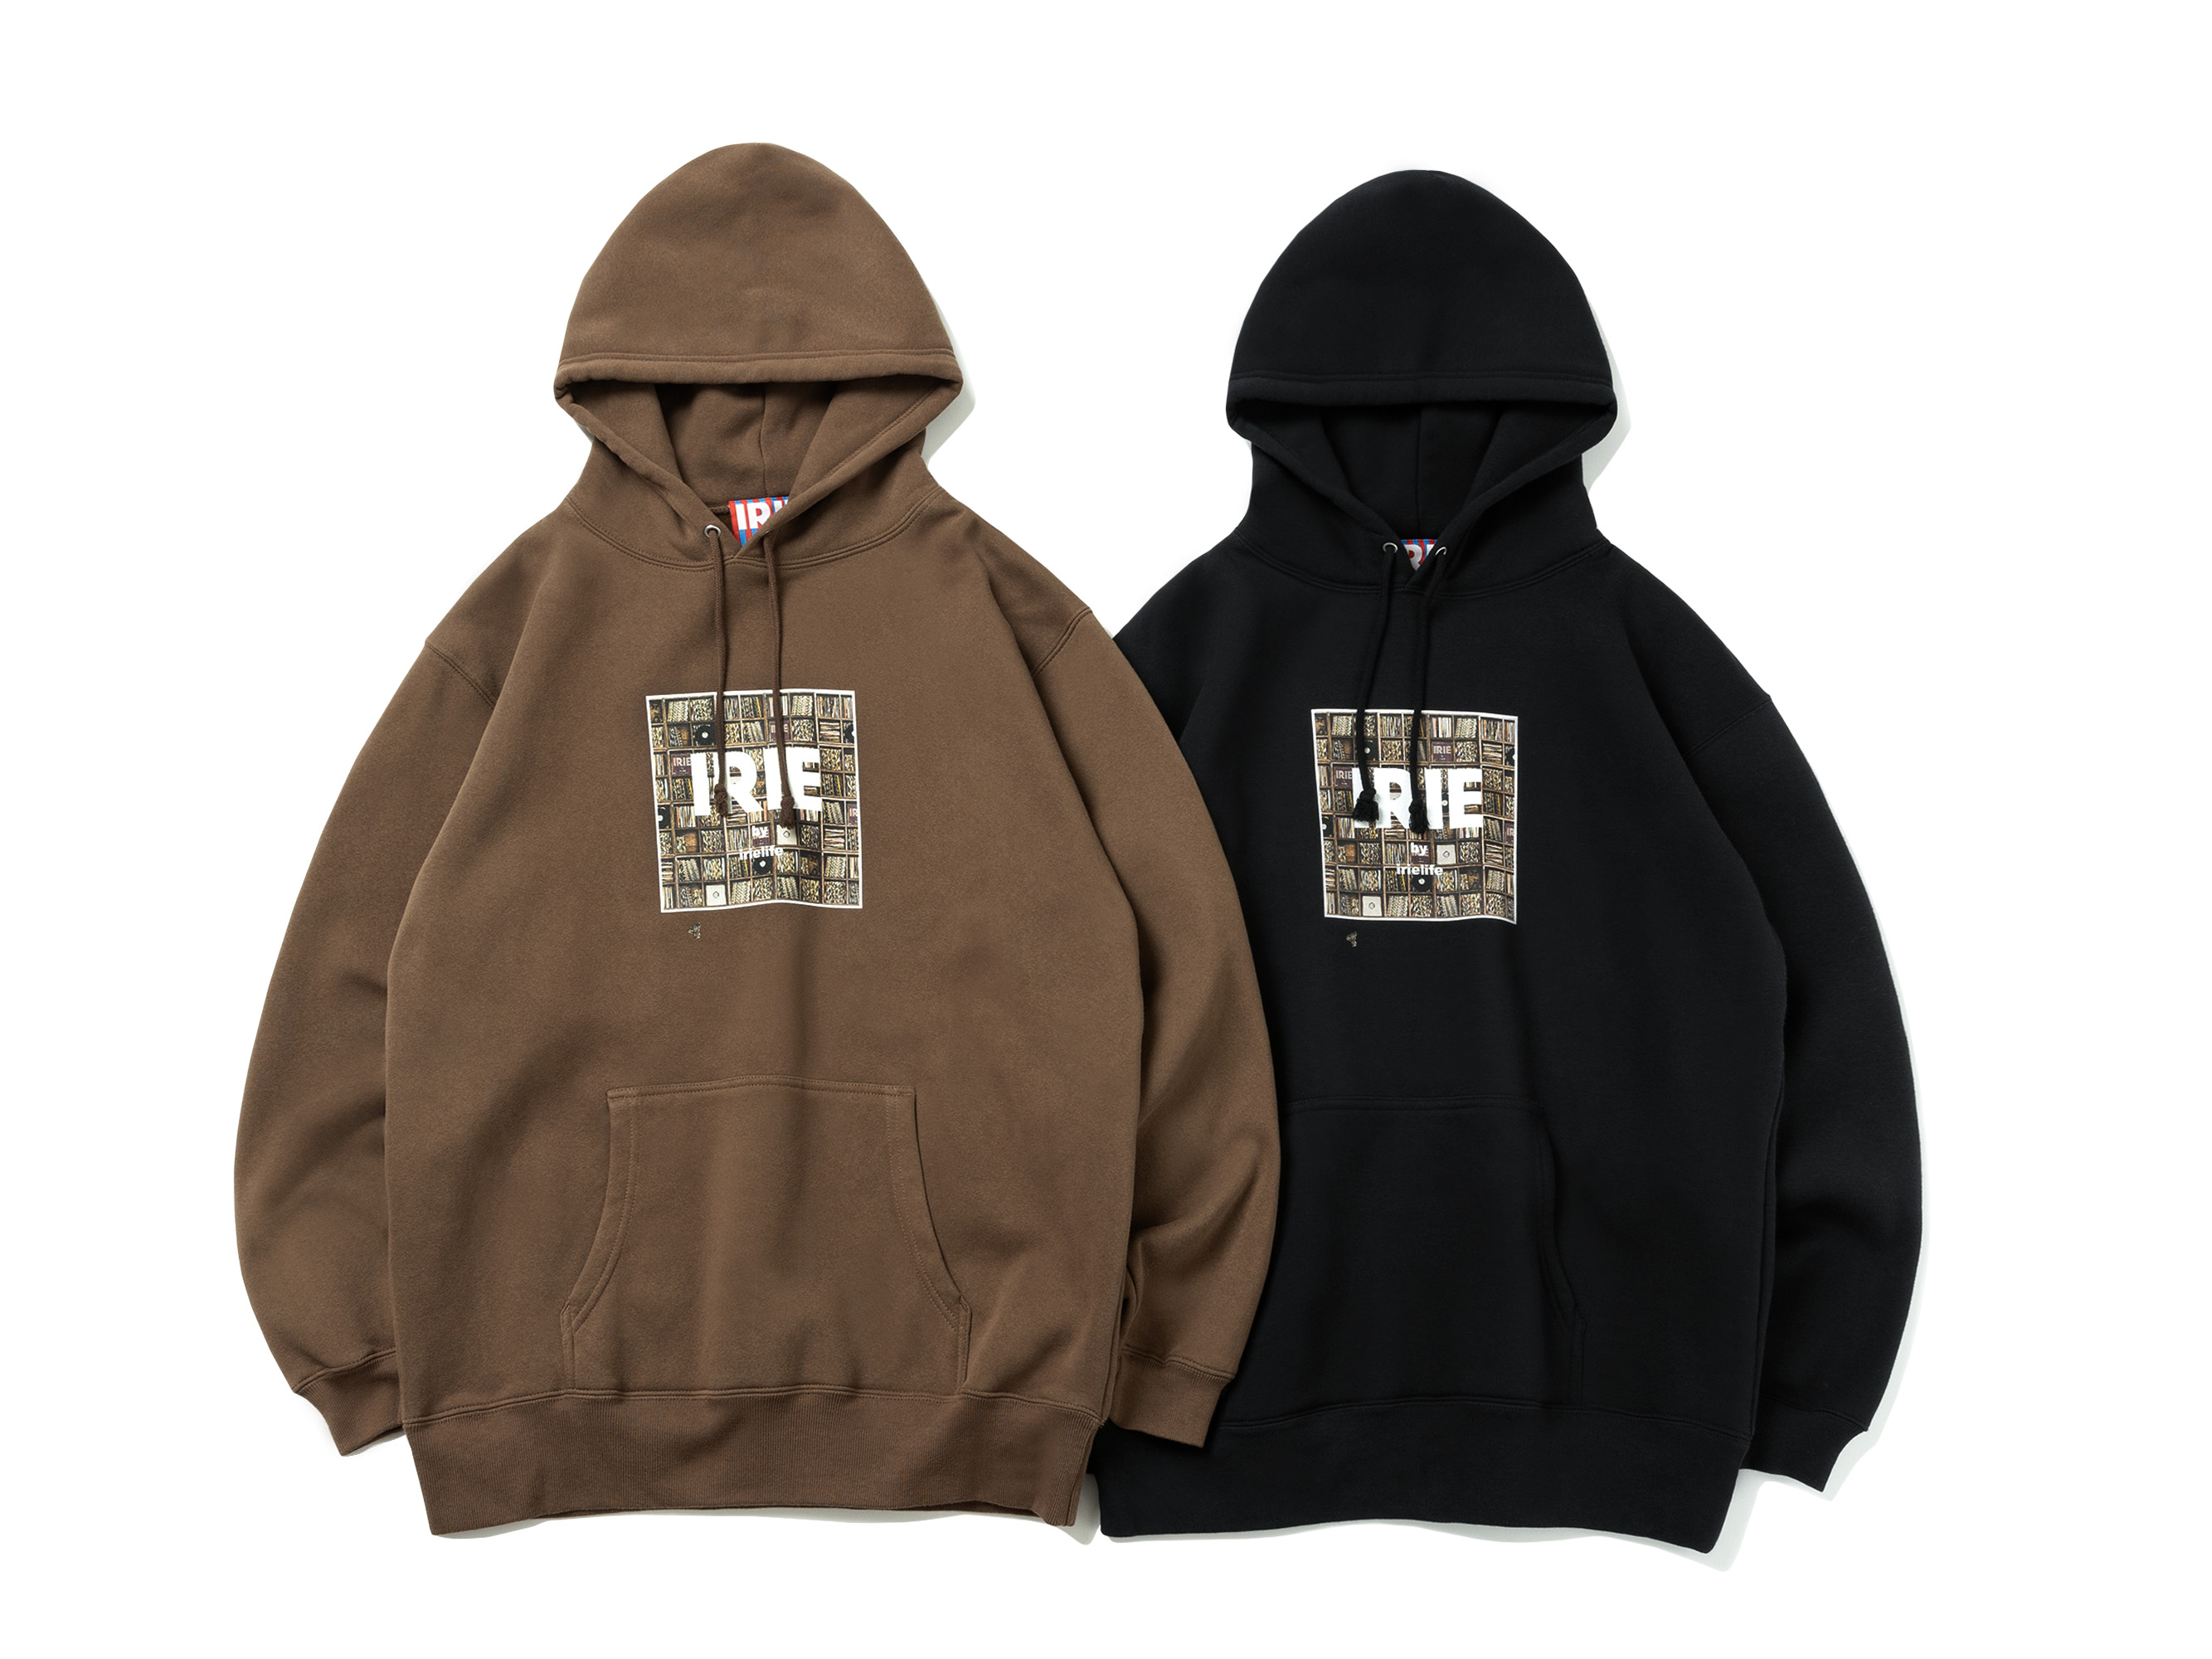 OLD RECORD BOX LOGO HOODIE - IRIE by irielife